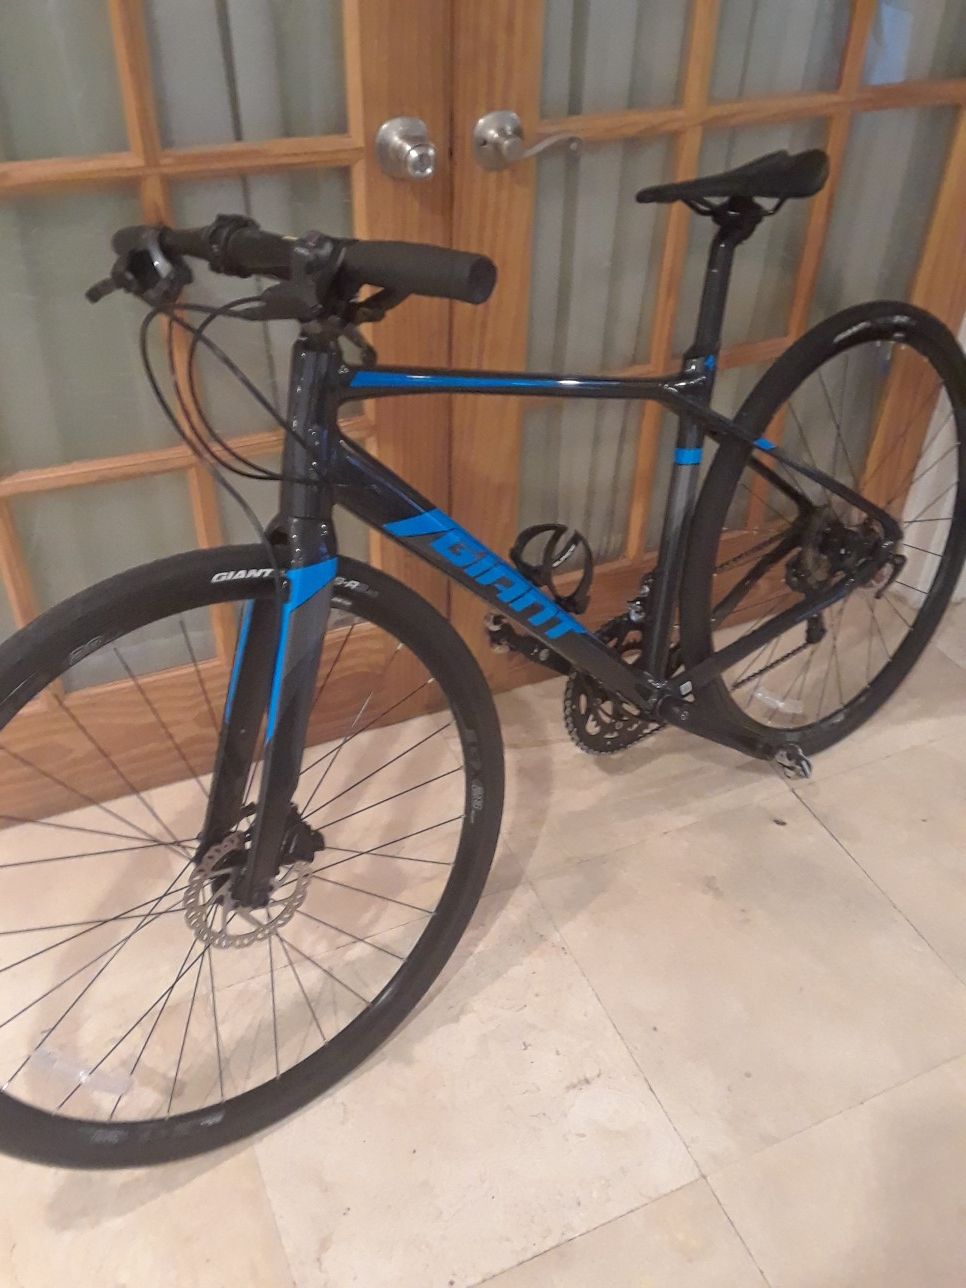 MINT CONDITION Giant Fast Road SL 3 $800 FIRM